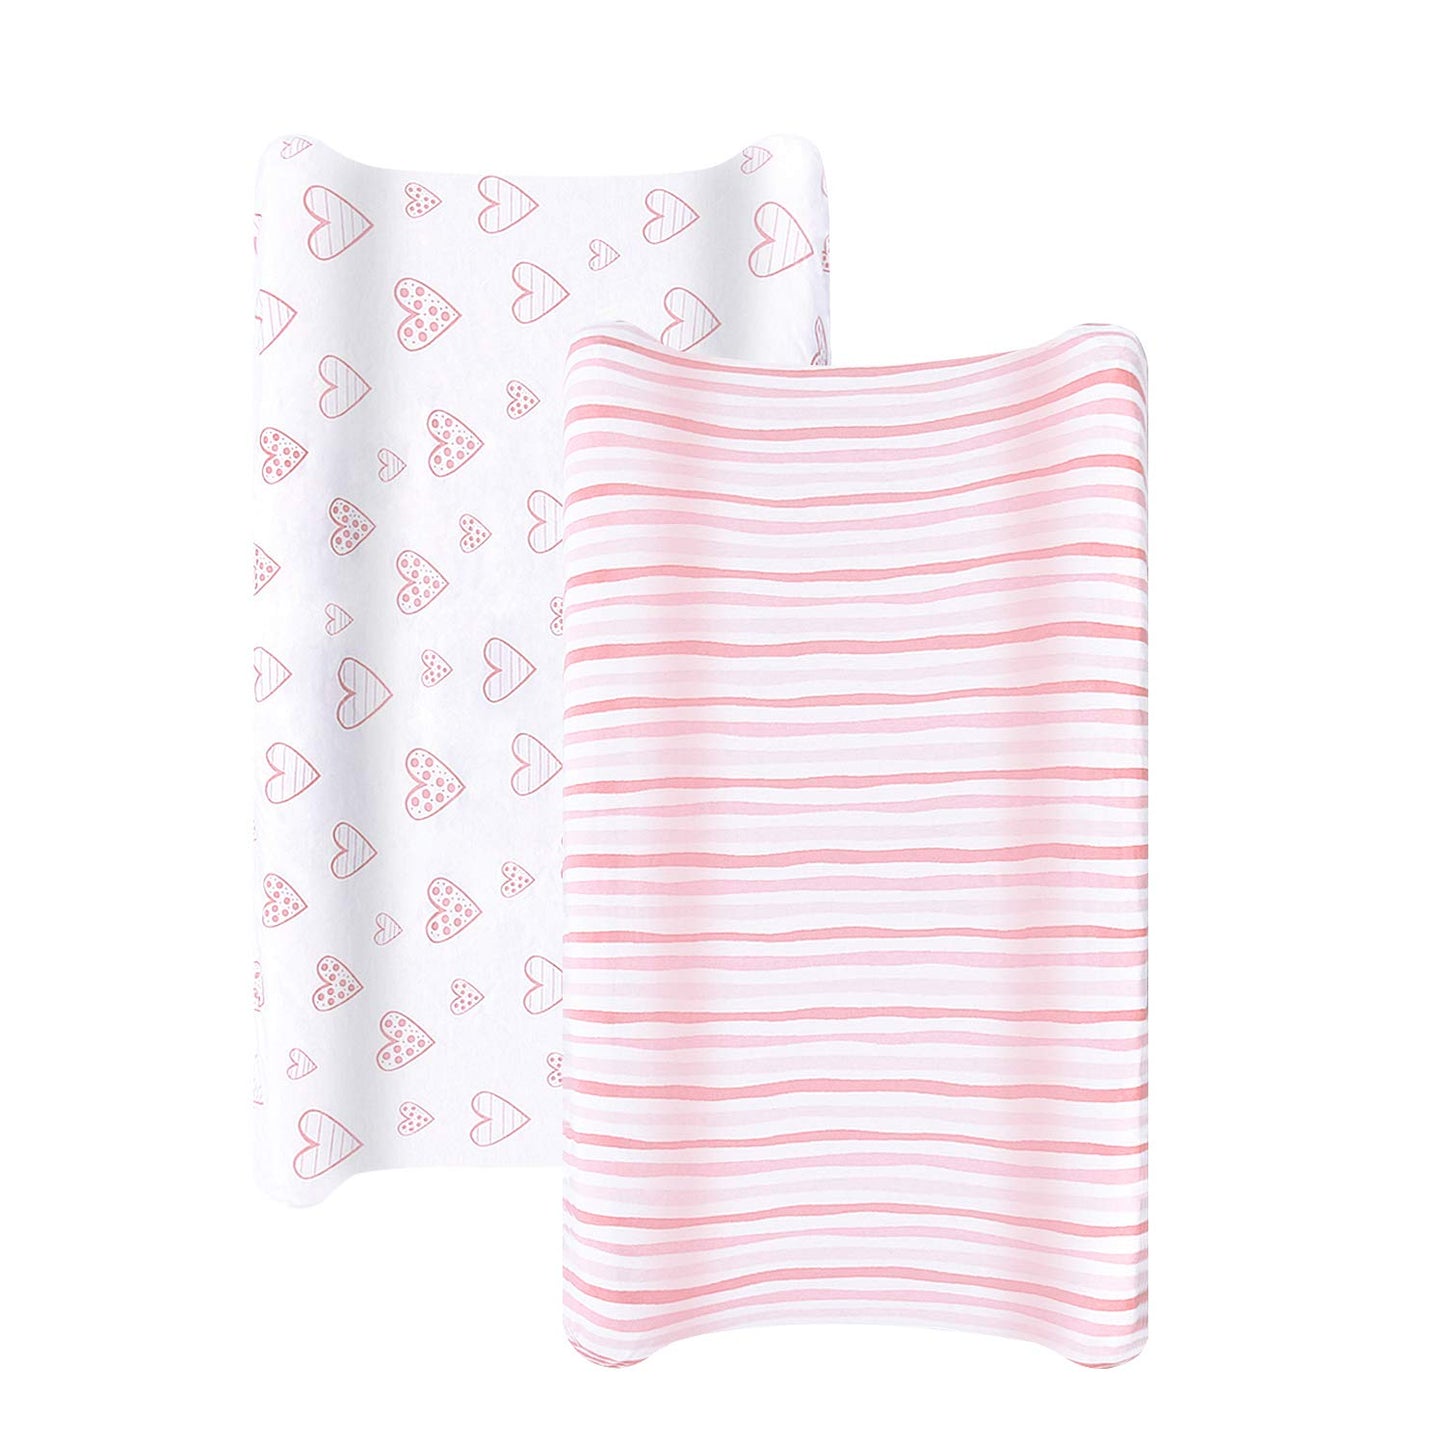 Changing Pad Cover - 2 Pack, 100% Jersey Knit Cotton, Pink & White - Biloban Online Store